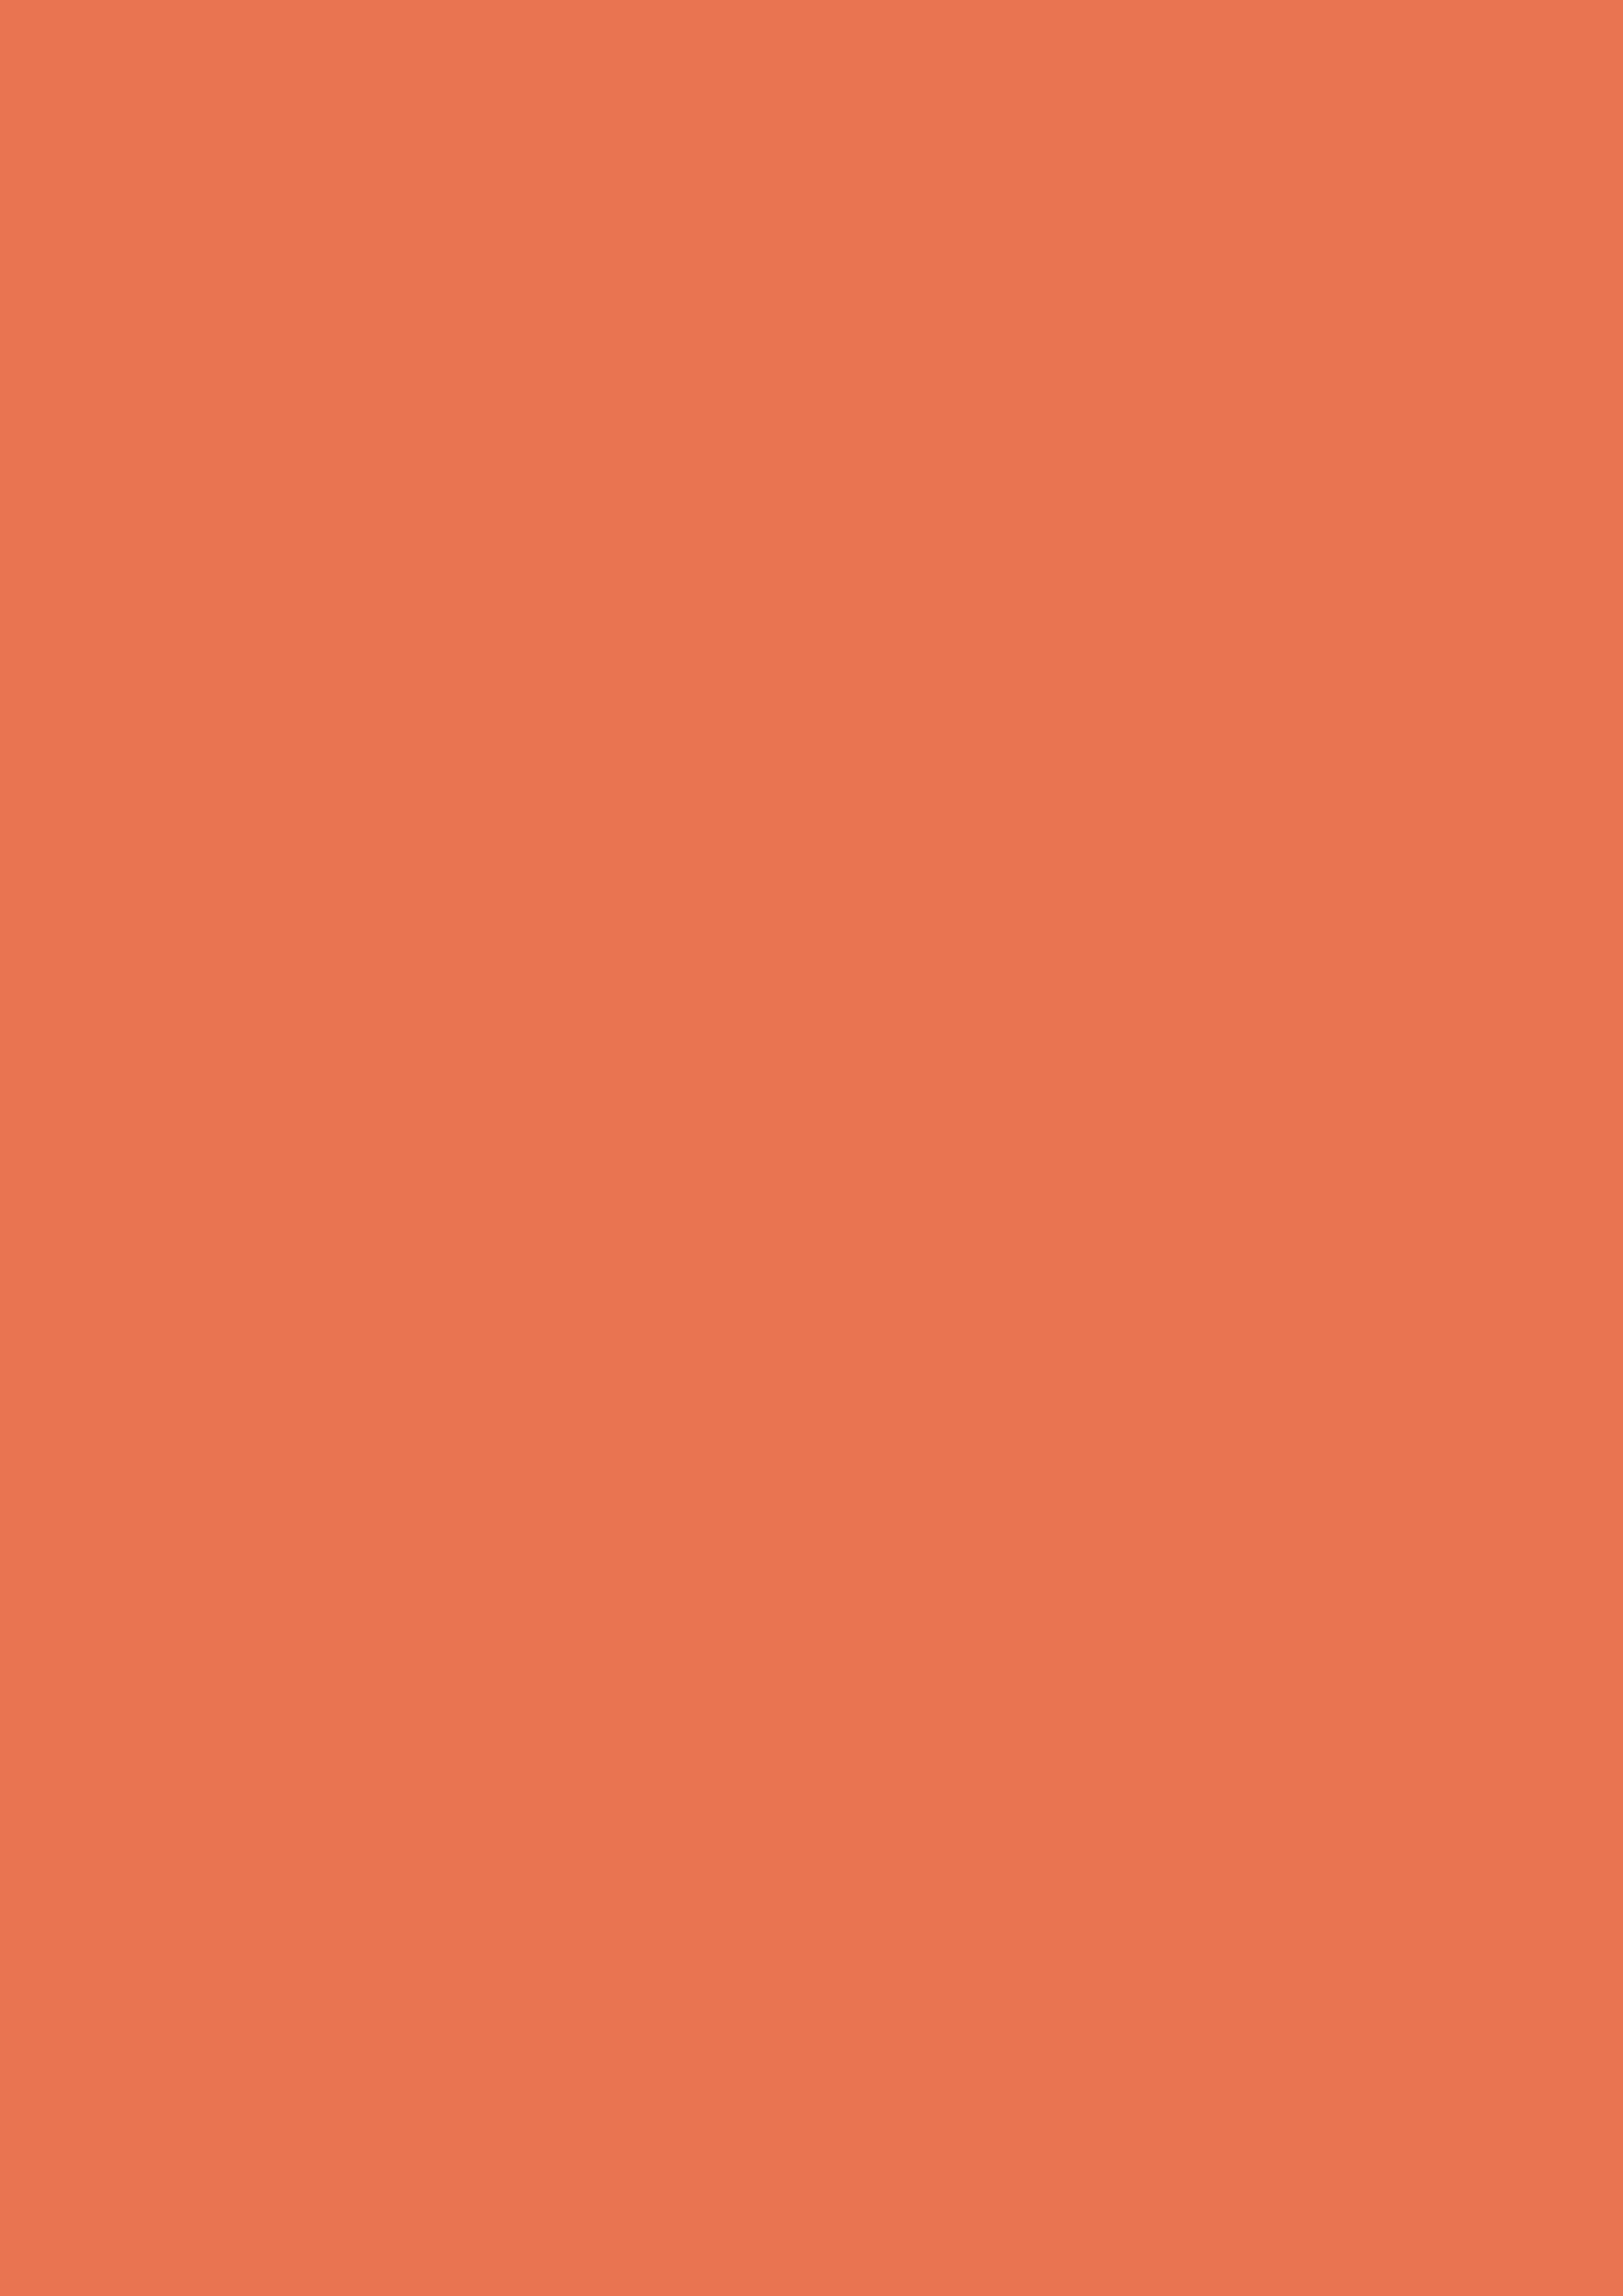 2480x3508 Light Red Ochre Solid Color Background